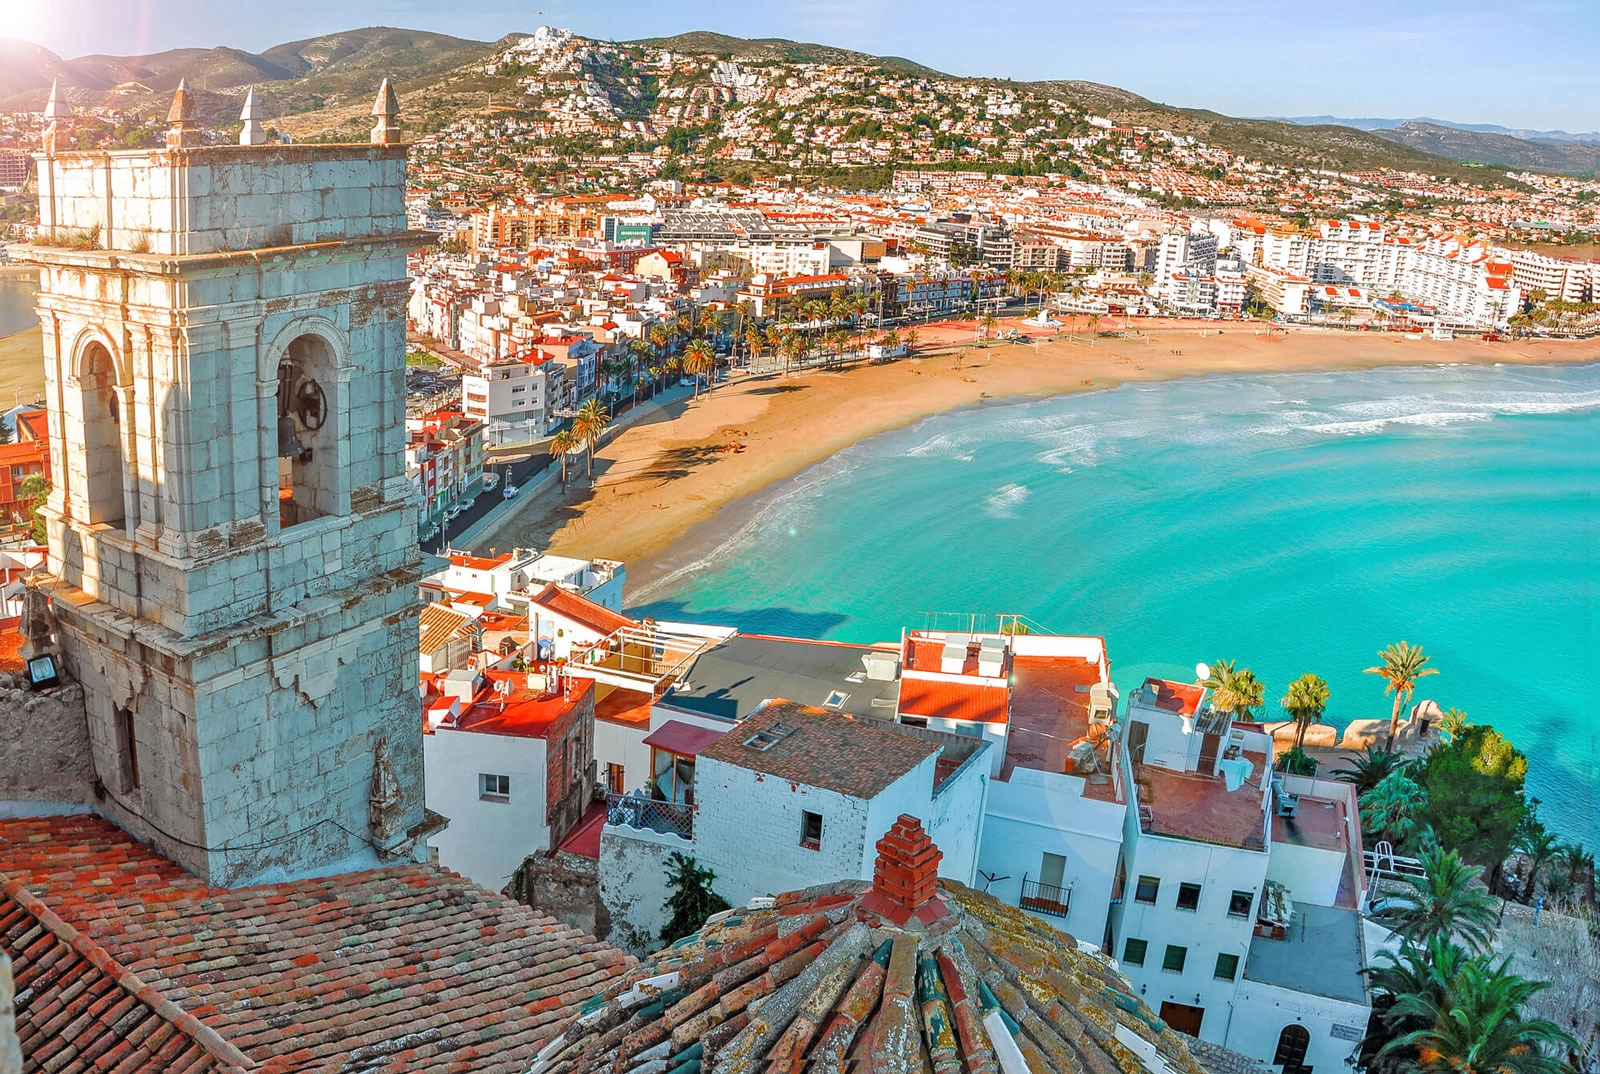 Spanish buildings in front of a blue-water bay